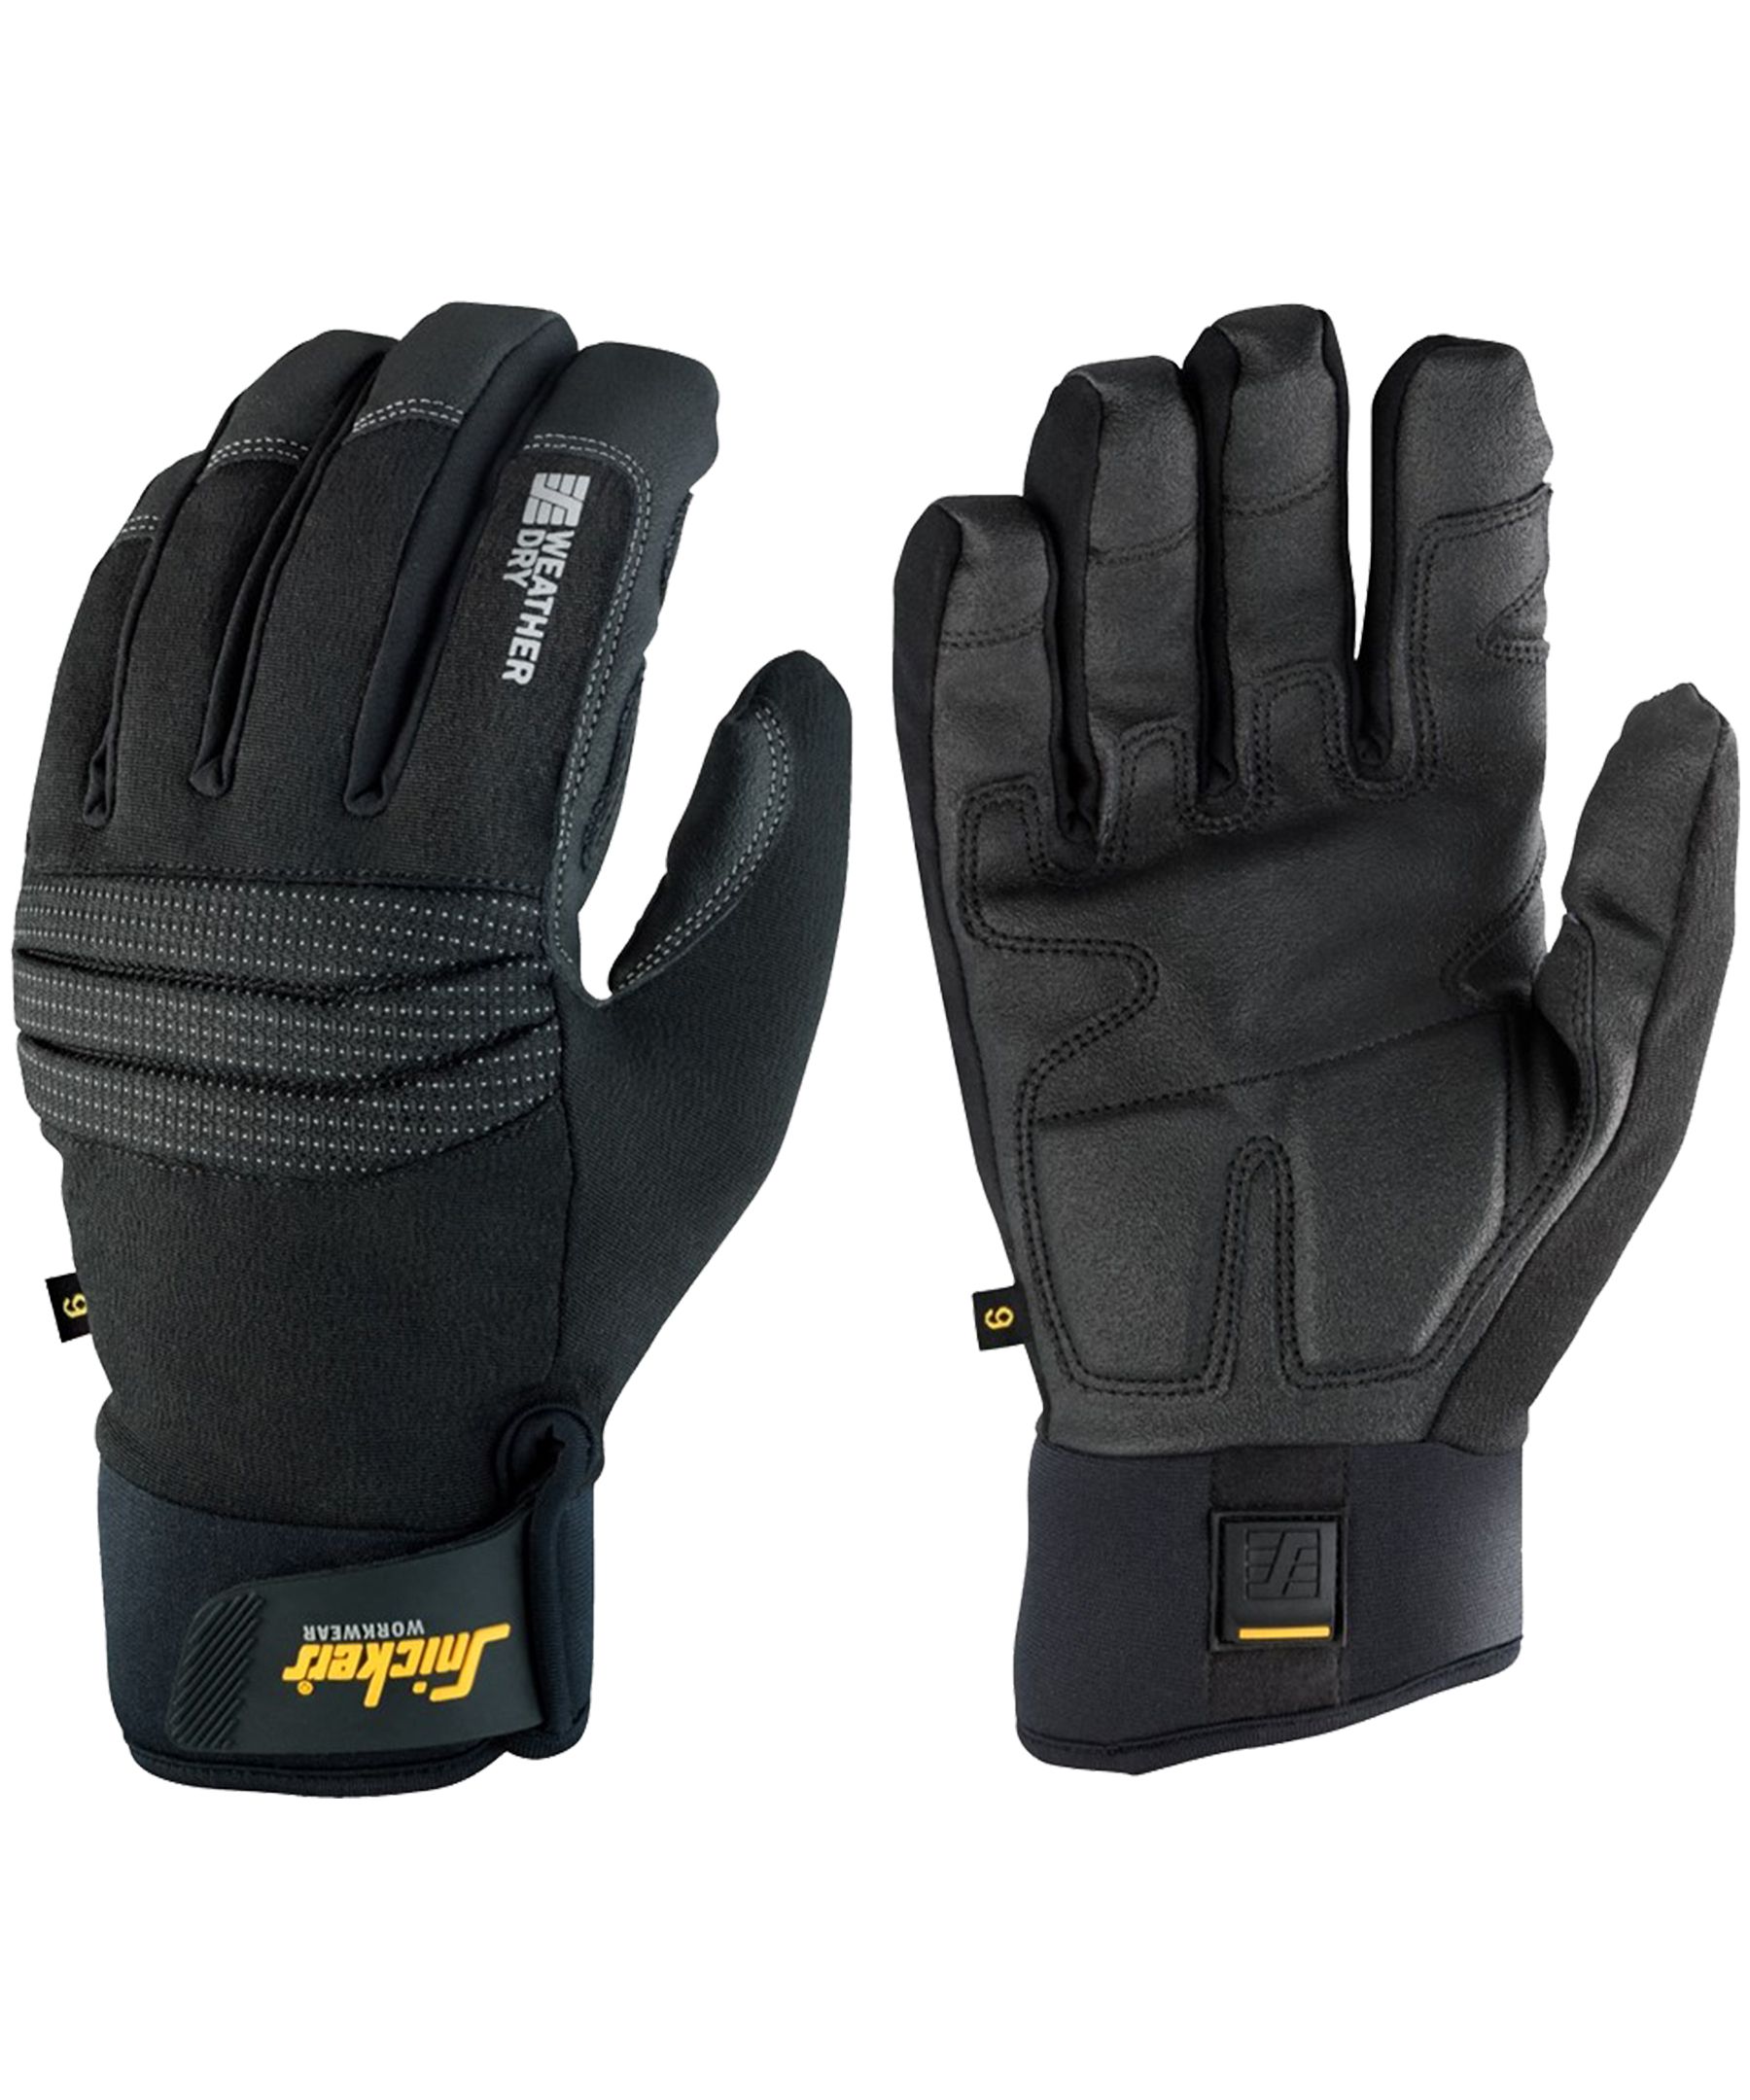 Snickers Weather Dry Gloves - Black/Black